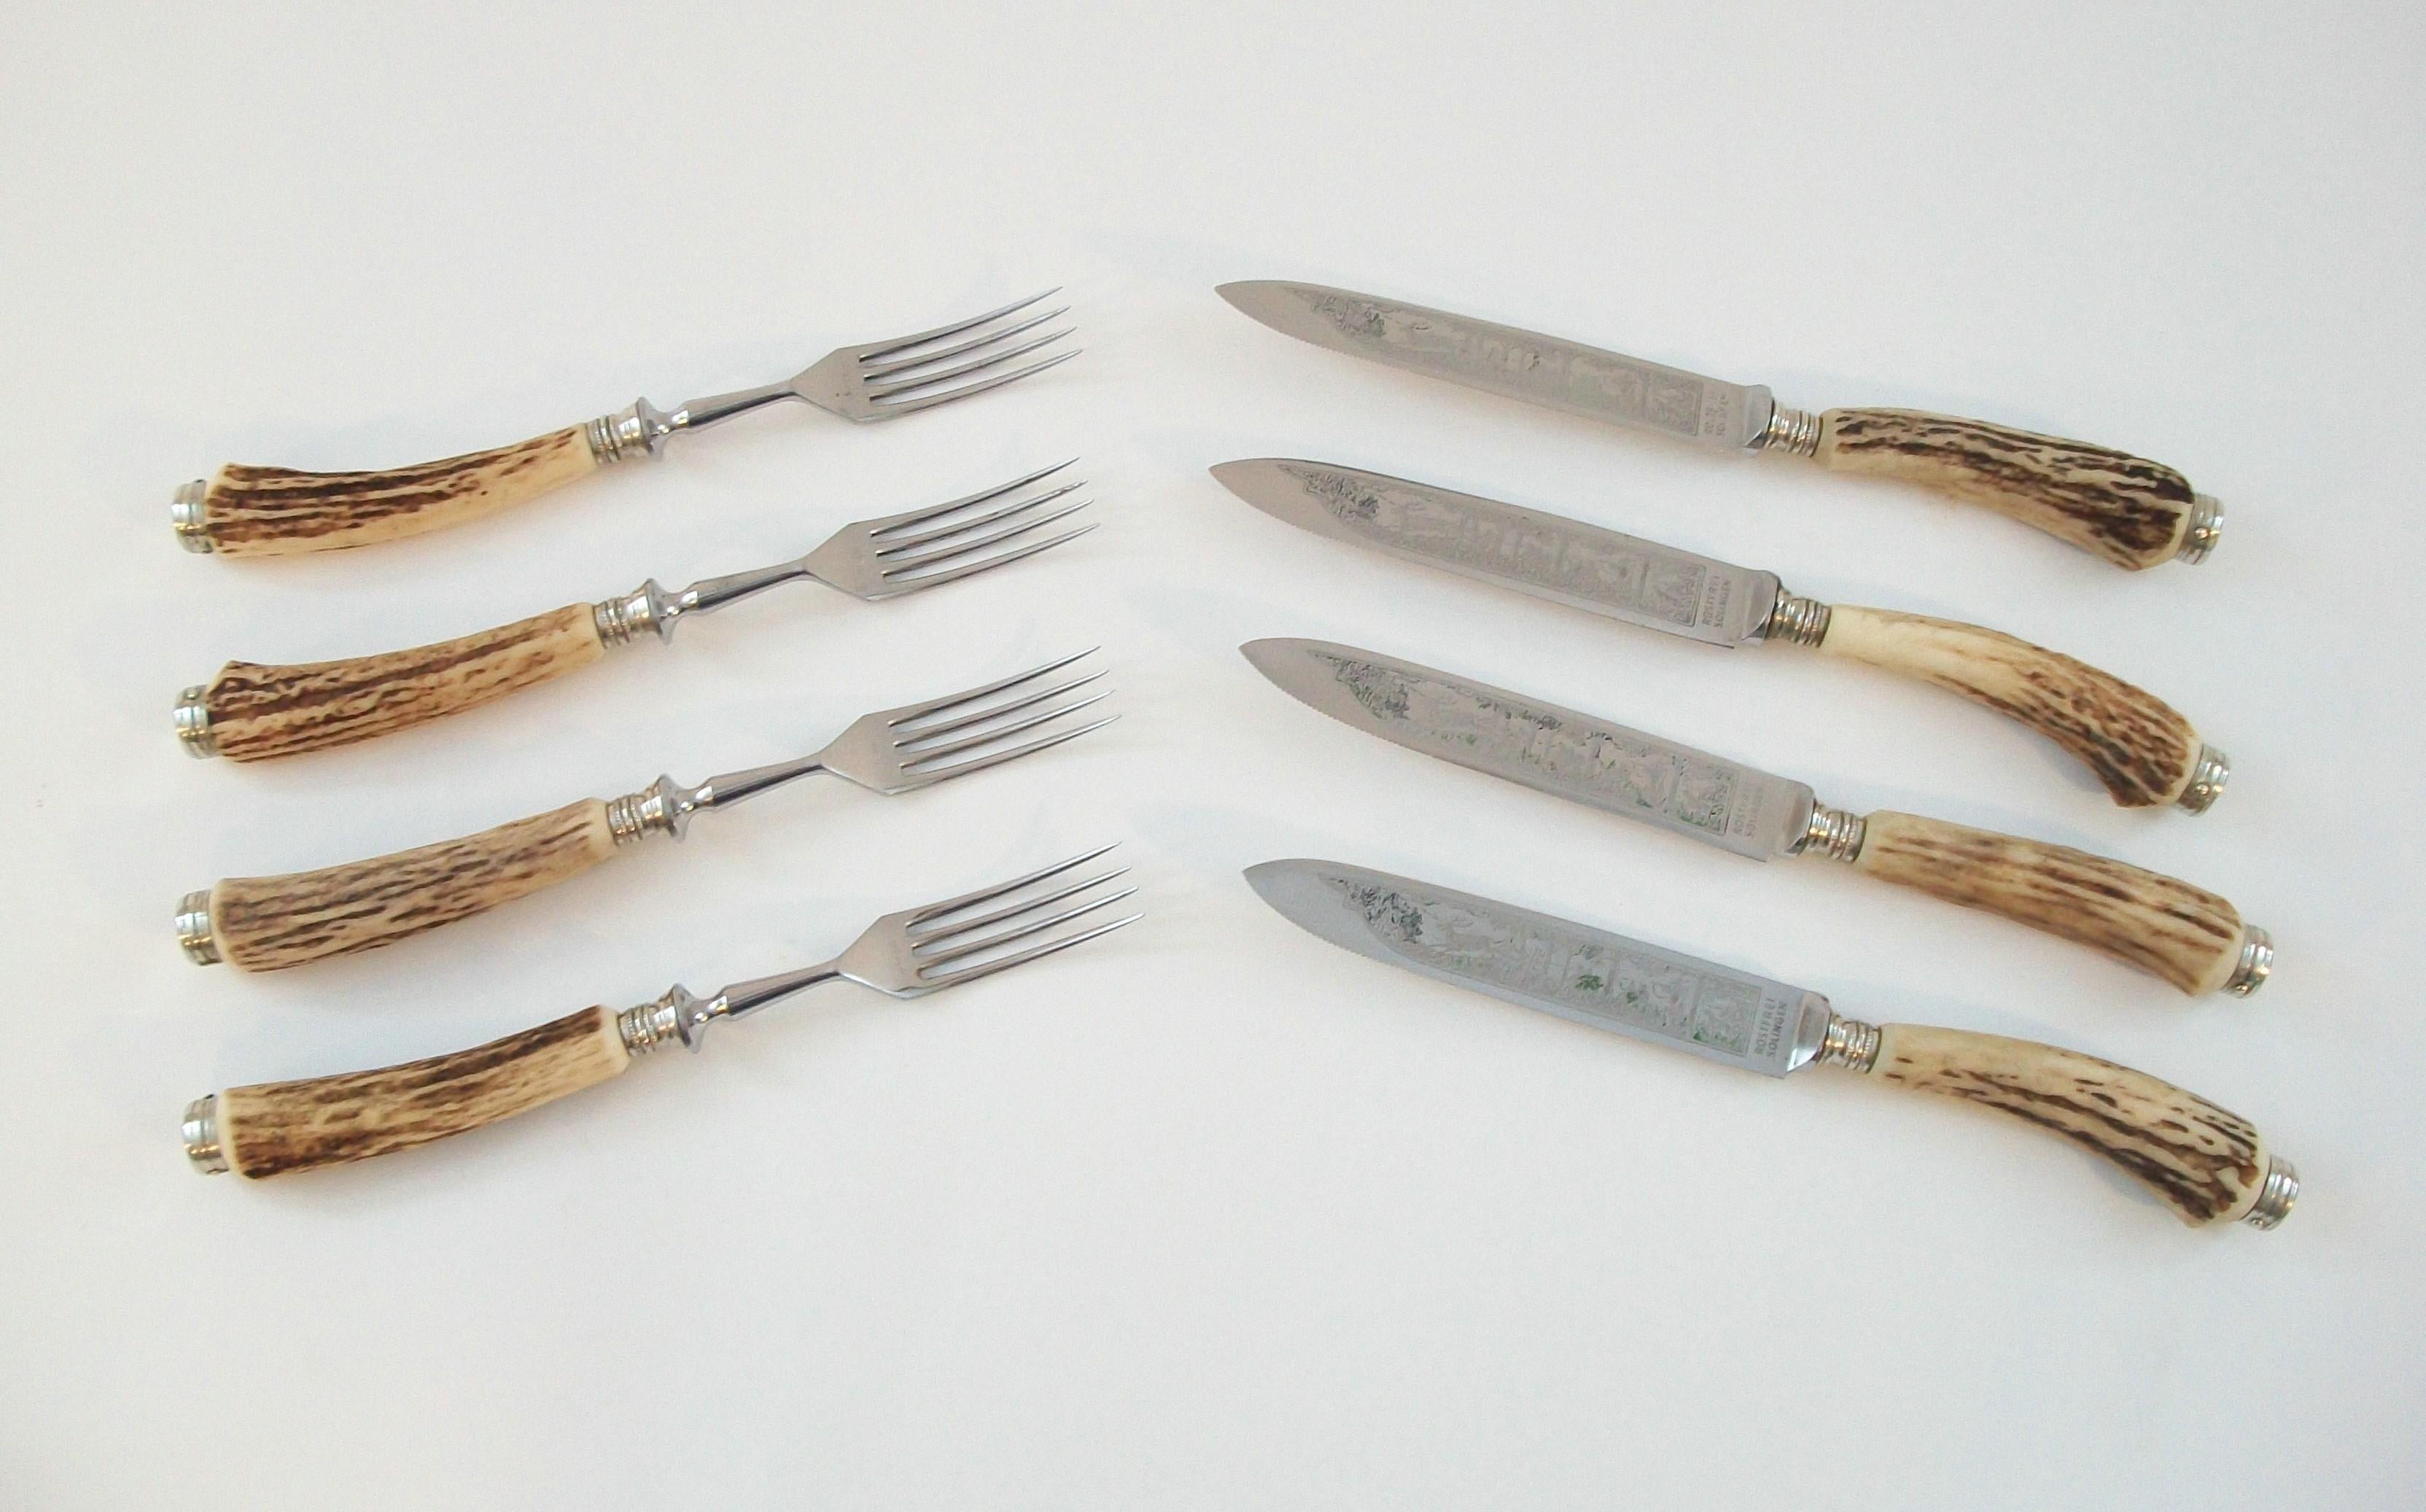 HUBERTUS SOLINGEN - Vintage set of four steak knives and forks - featuring antler handles and stainless steel engraved knife blades - each piece signed - Germany - circa 1950's.

Excellent vintage condition - surface scratches - enamel loss - no